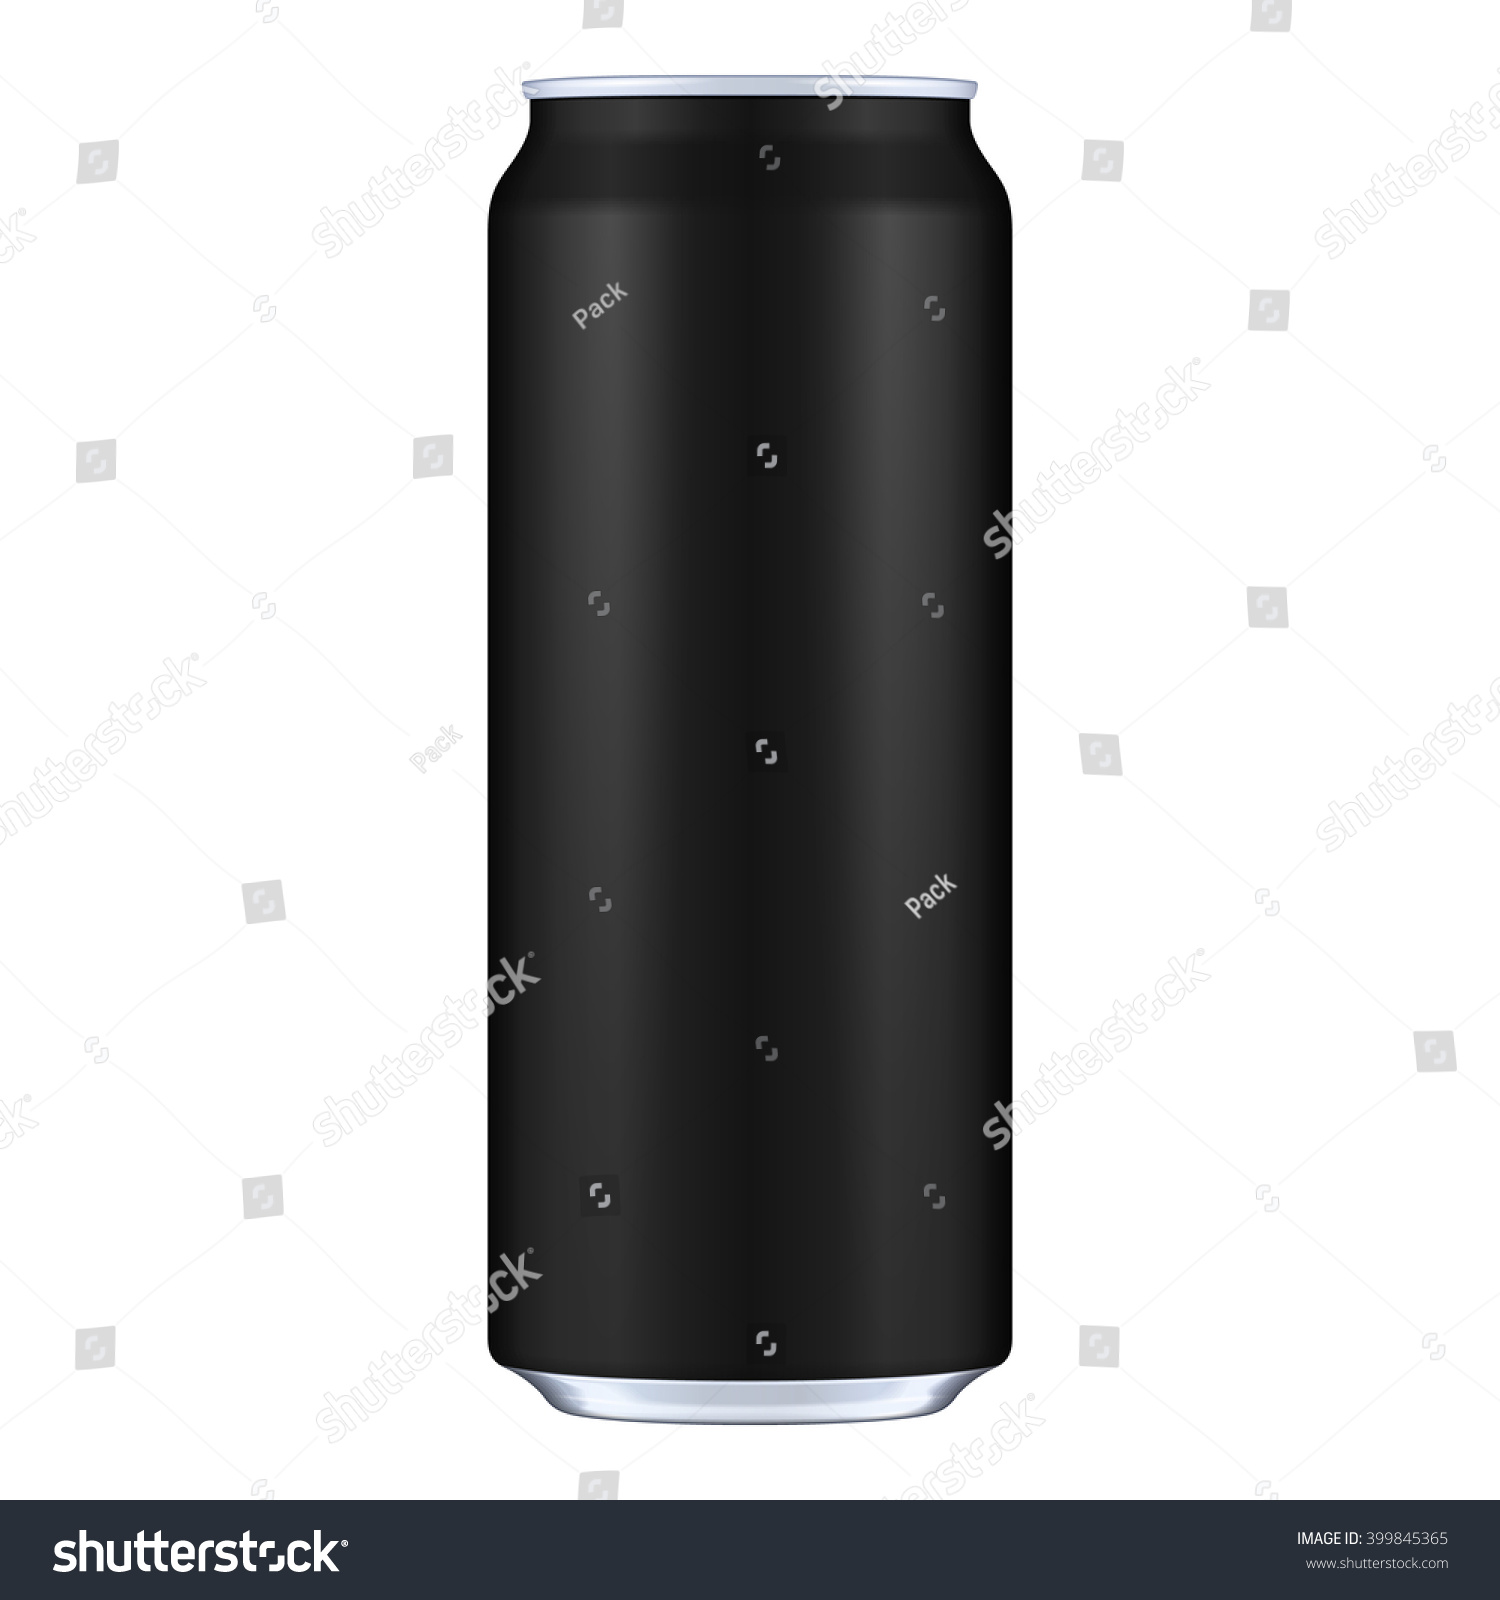 SVG of Black Metal Aluminum Beverage Drink Can 500ml. Mockup Template Ready For Your Design. Isolated On White Background. Product Packing. Vector EPS10 Product Packing Vector EPS10 svg